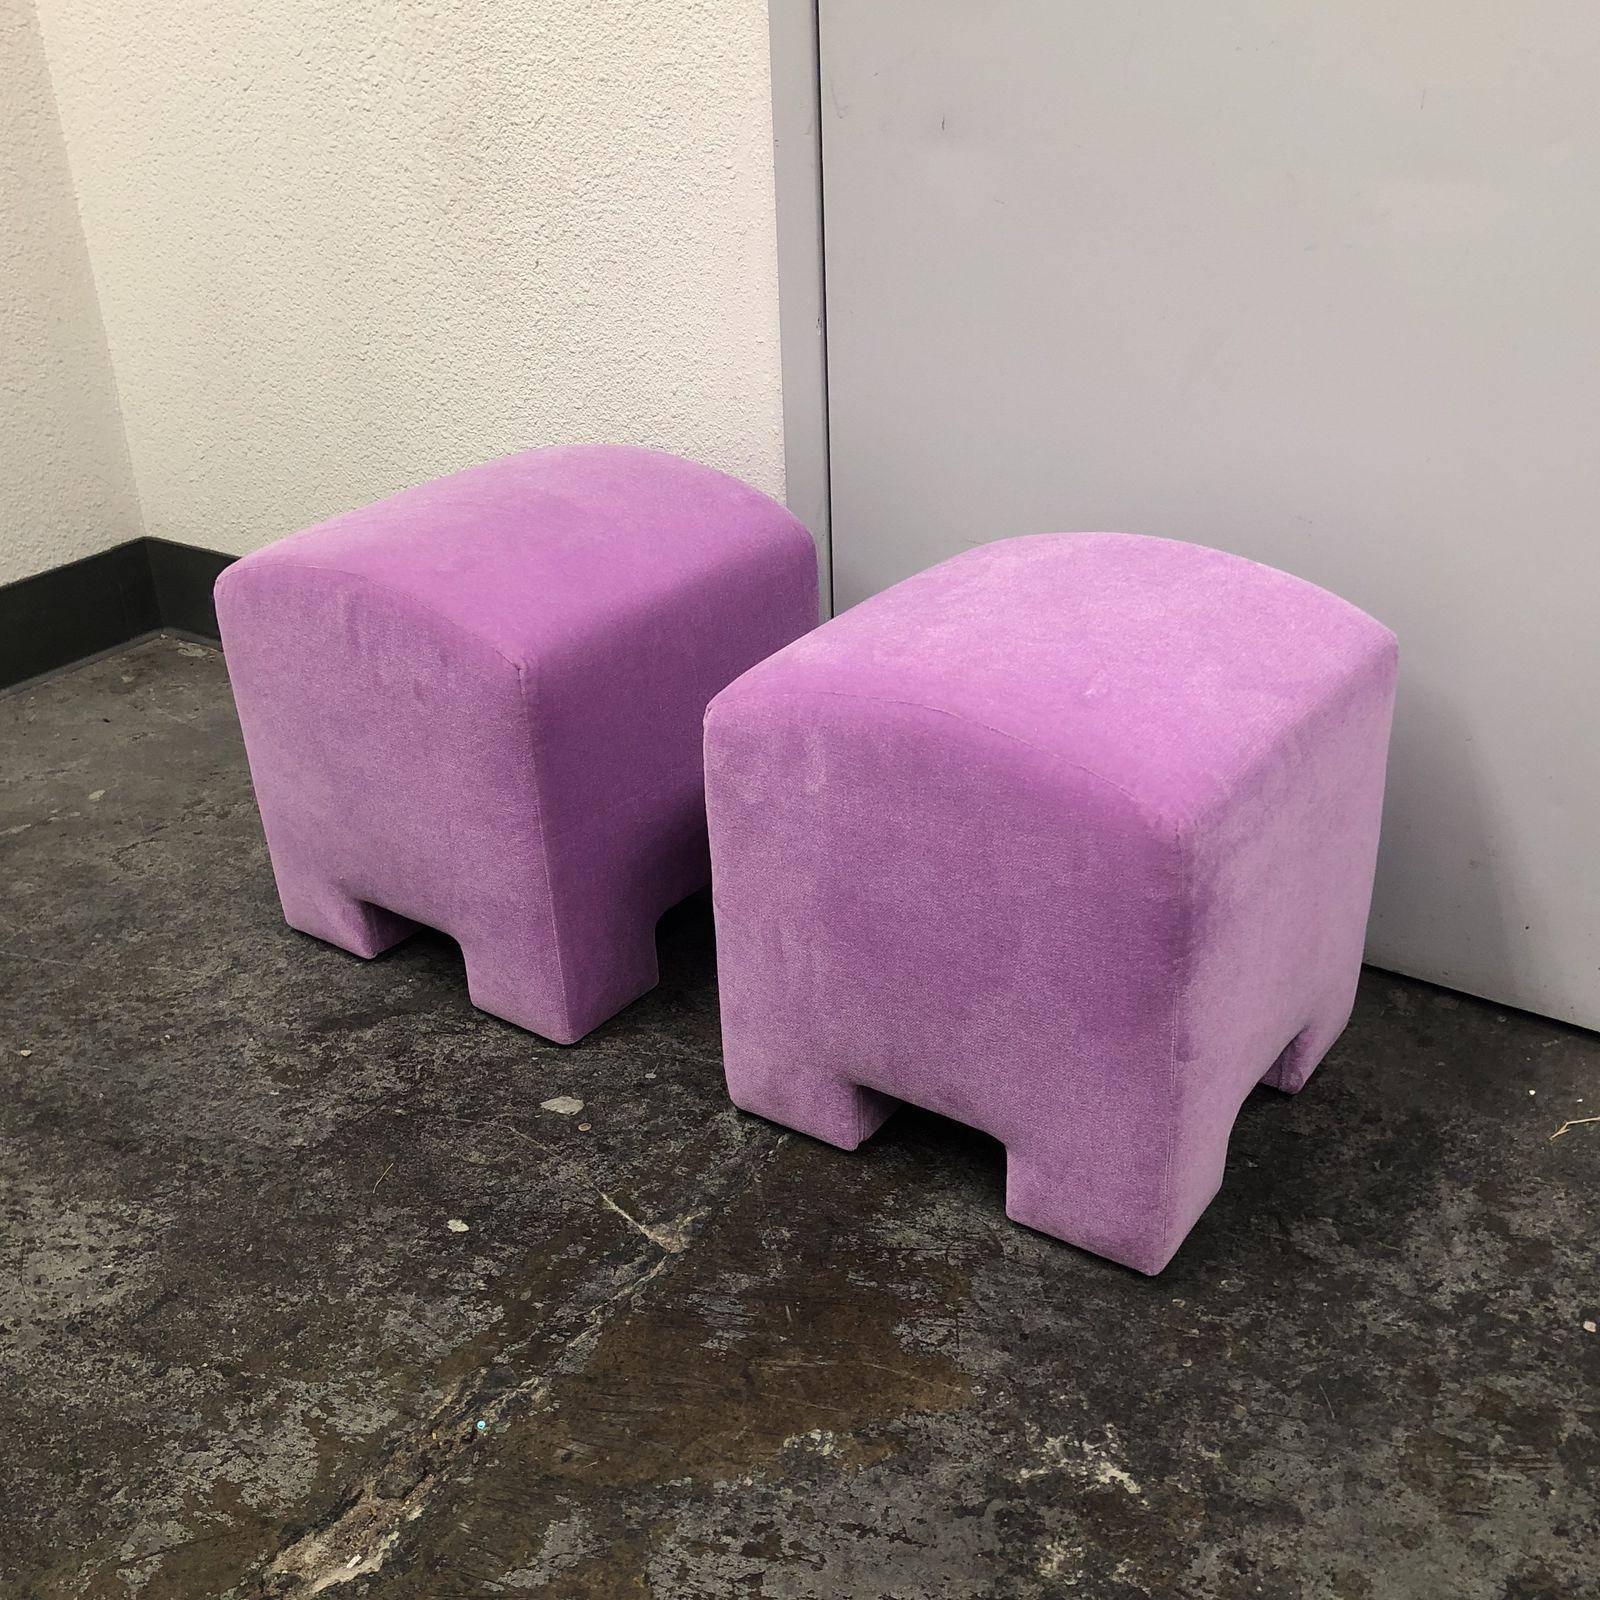 A pair of custom designed ottoman stools by Gulassa & Co. Each stool has a arch surface with tight luxurious pink velvet upholstery. From bottom to top, with clean simple lines creates a striking silhouette. Custom-made USA.